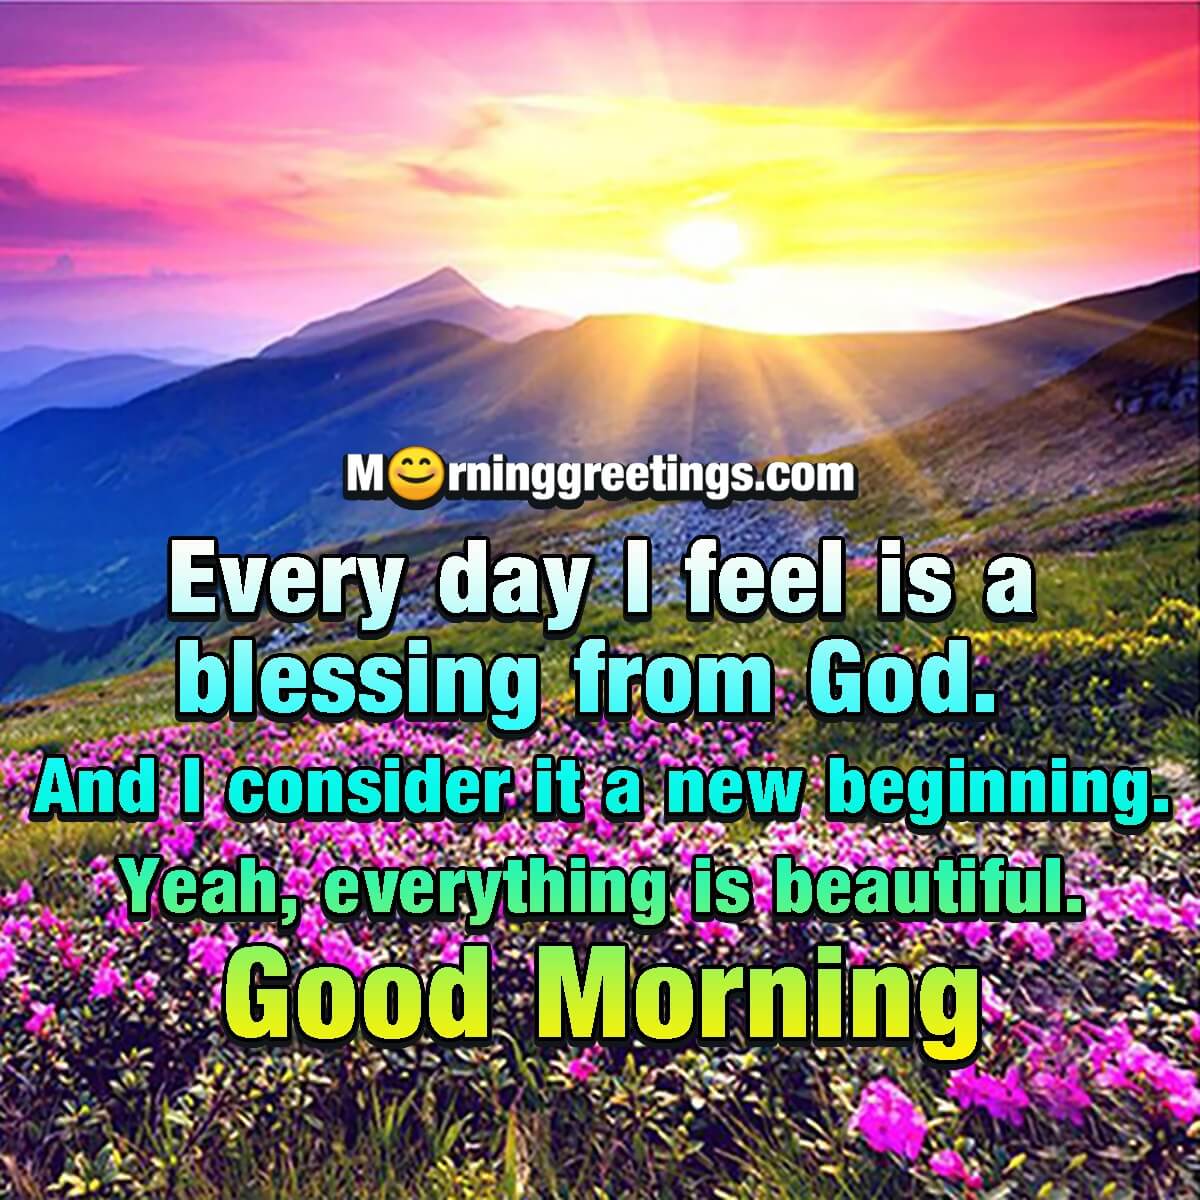 Good Morning Every Day I Feel Is A Blessing From God